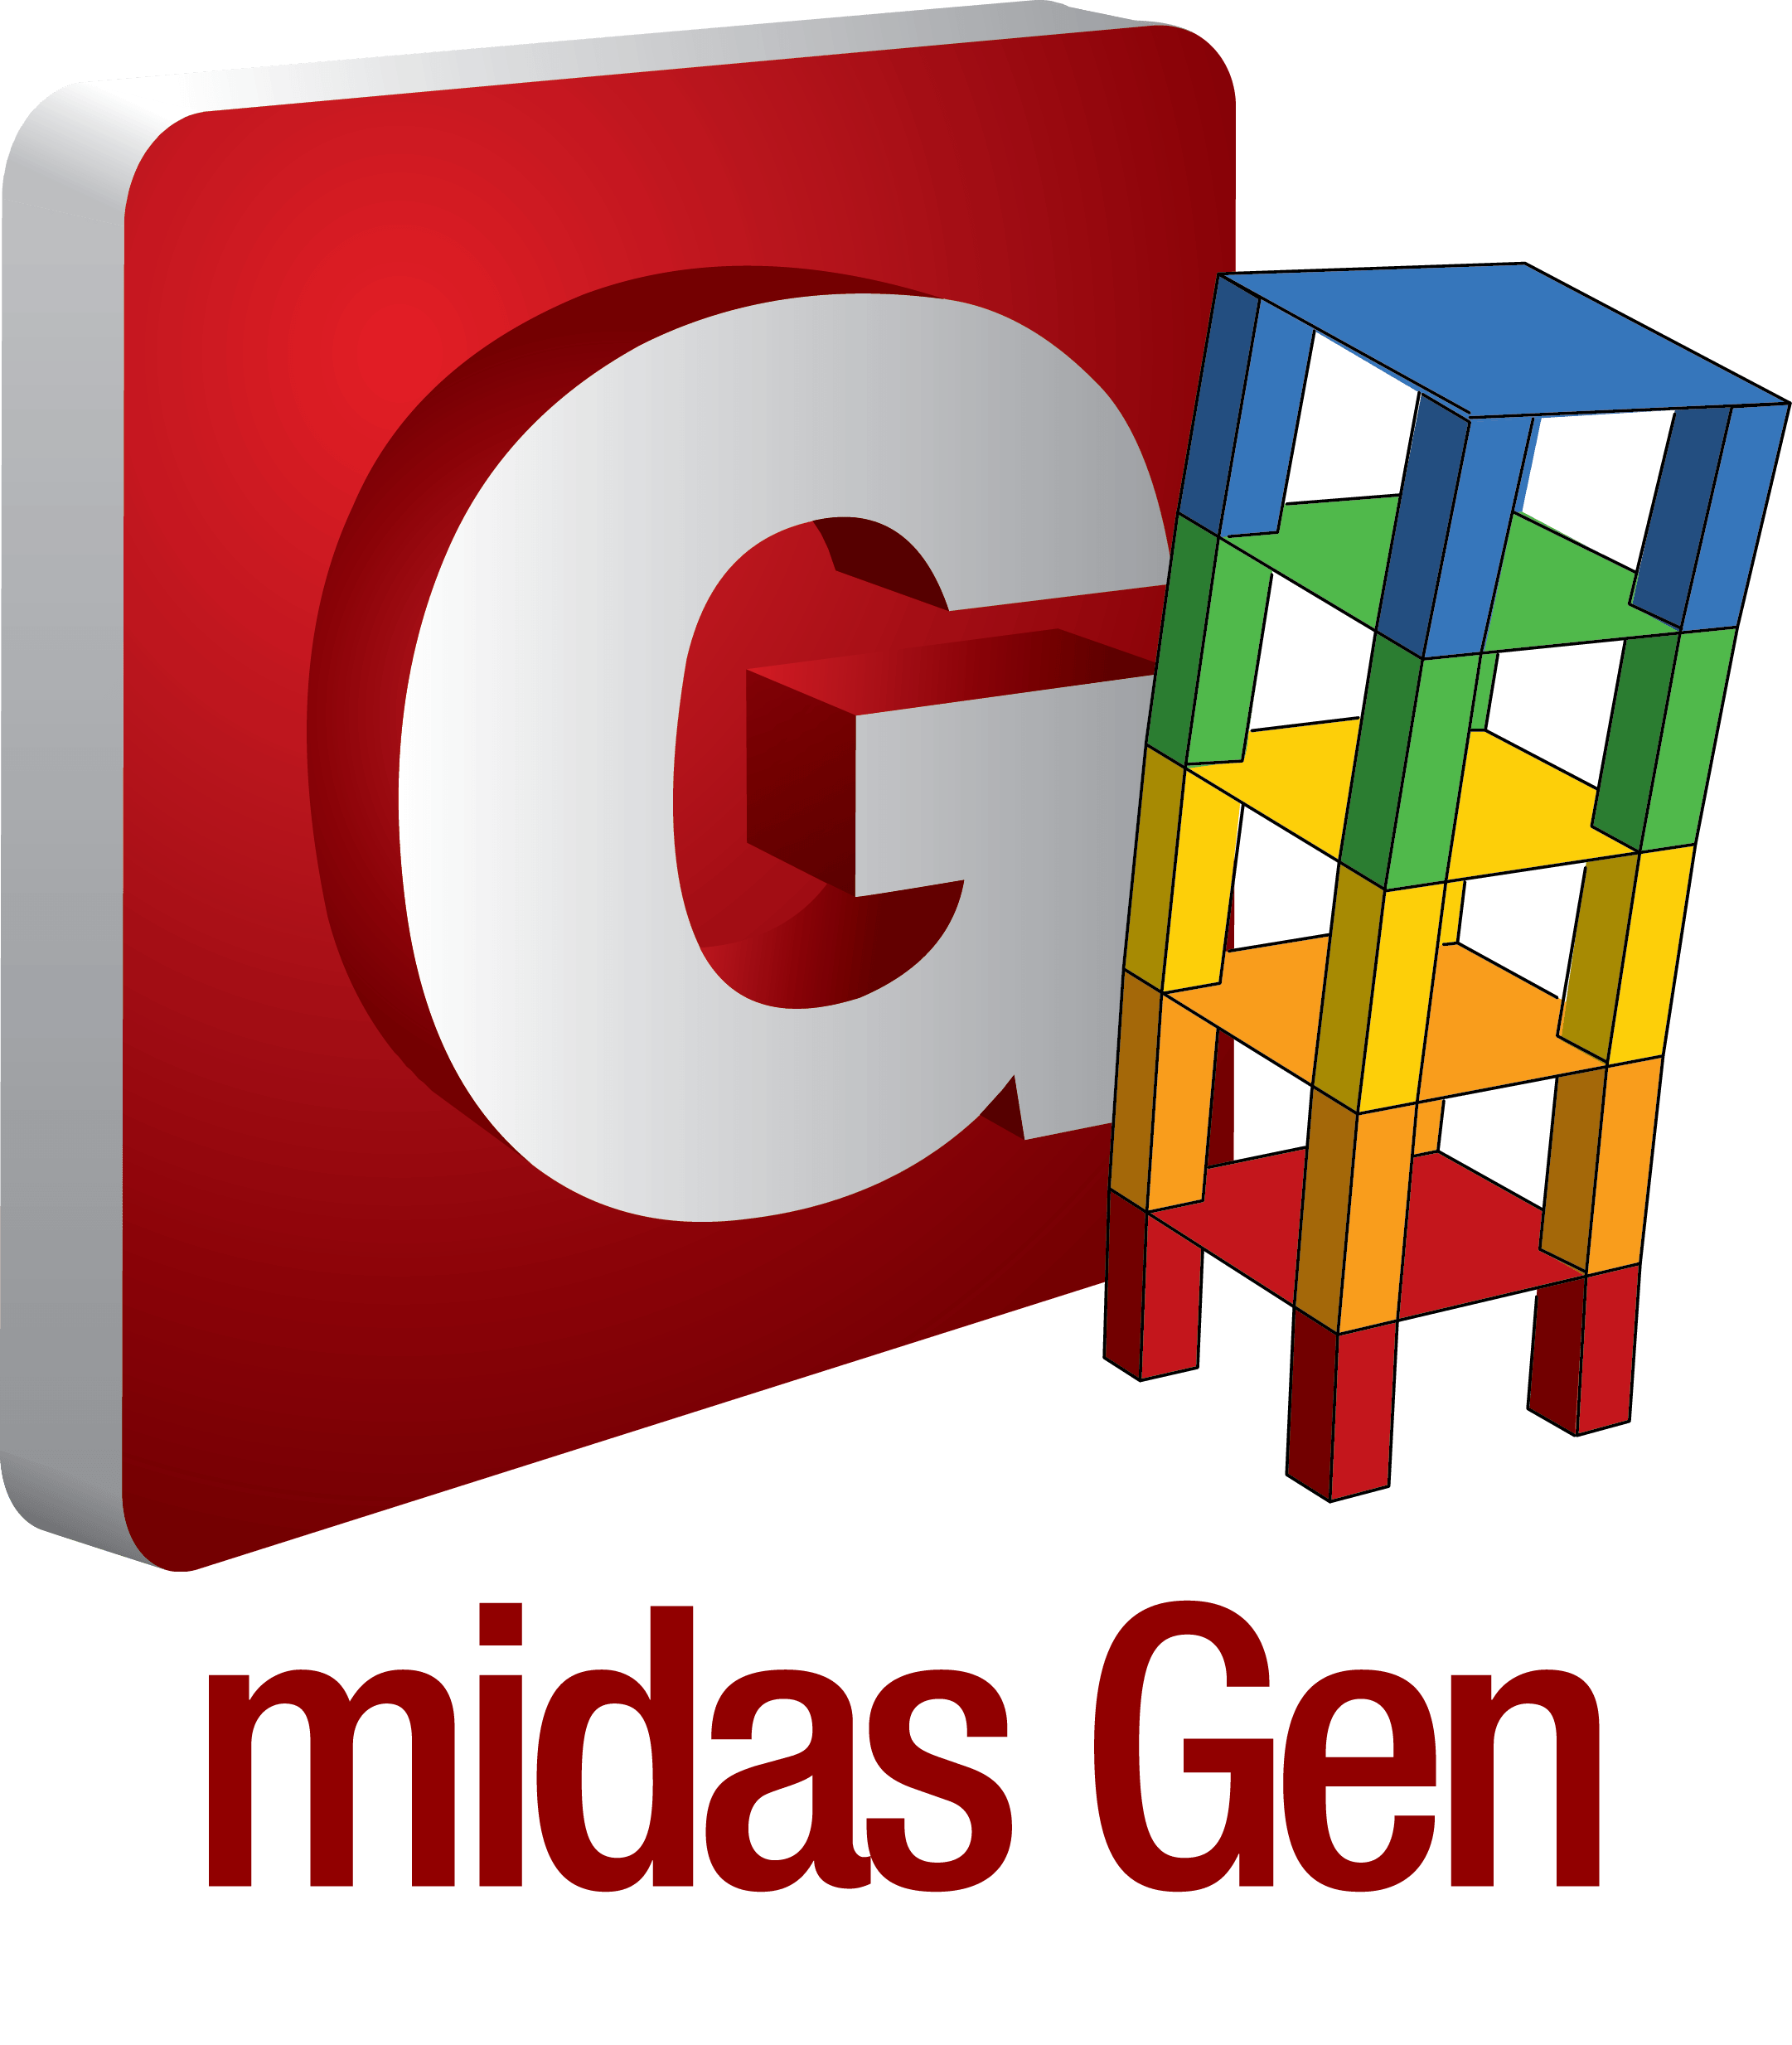 Midas Logo - The masterworks of structural engineering